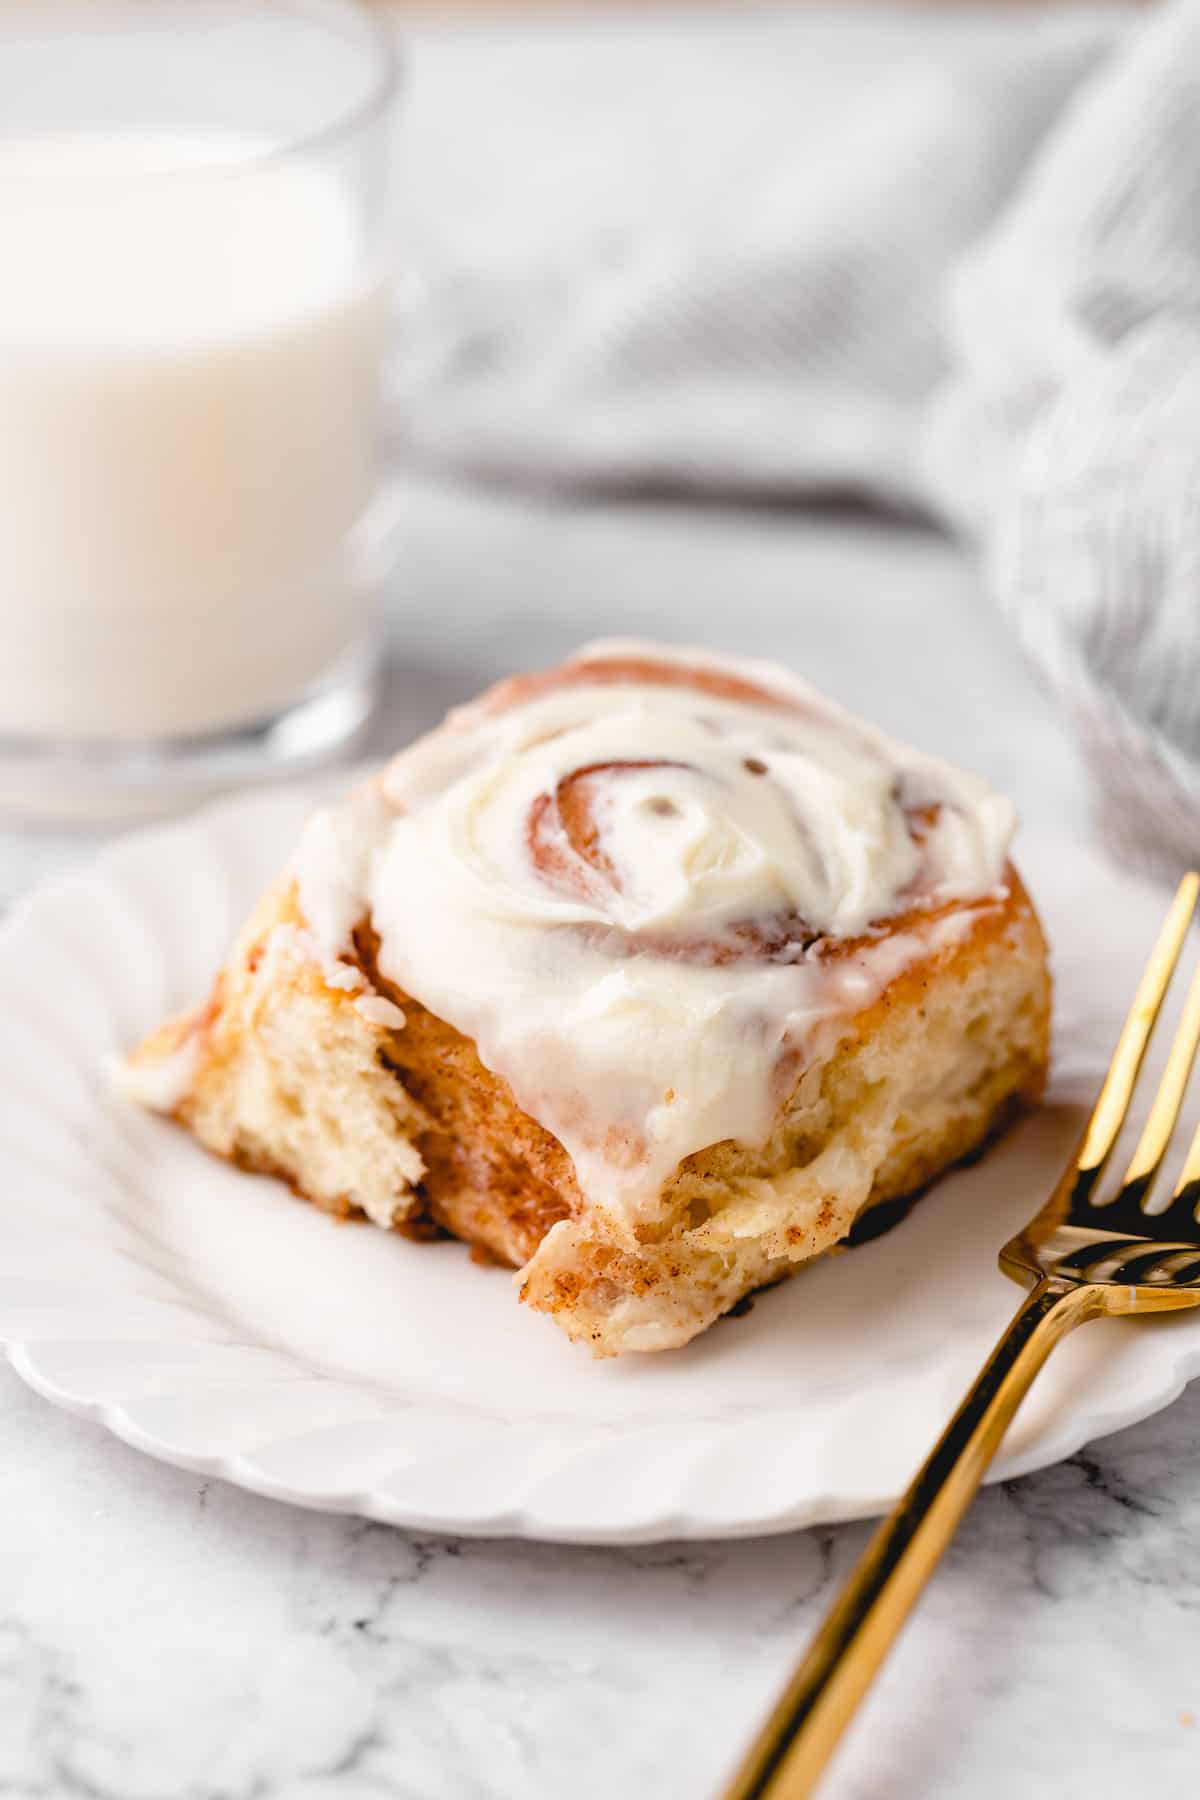 Vegan cinnamon roll on white plate with gold fork, with glass of milk in background